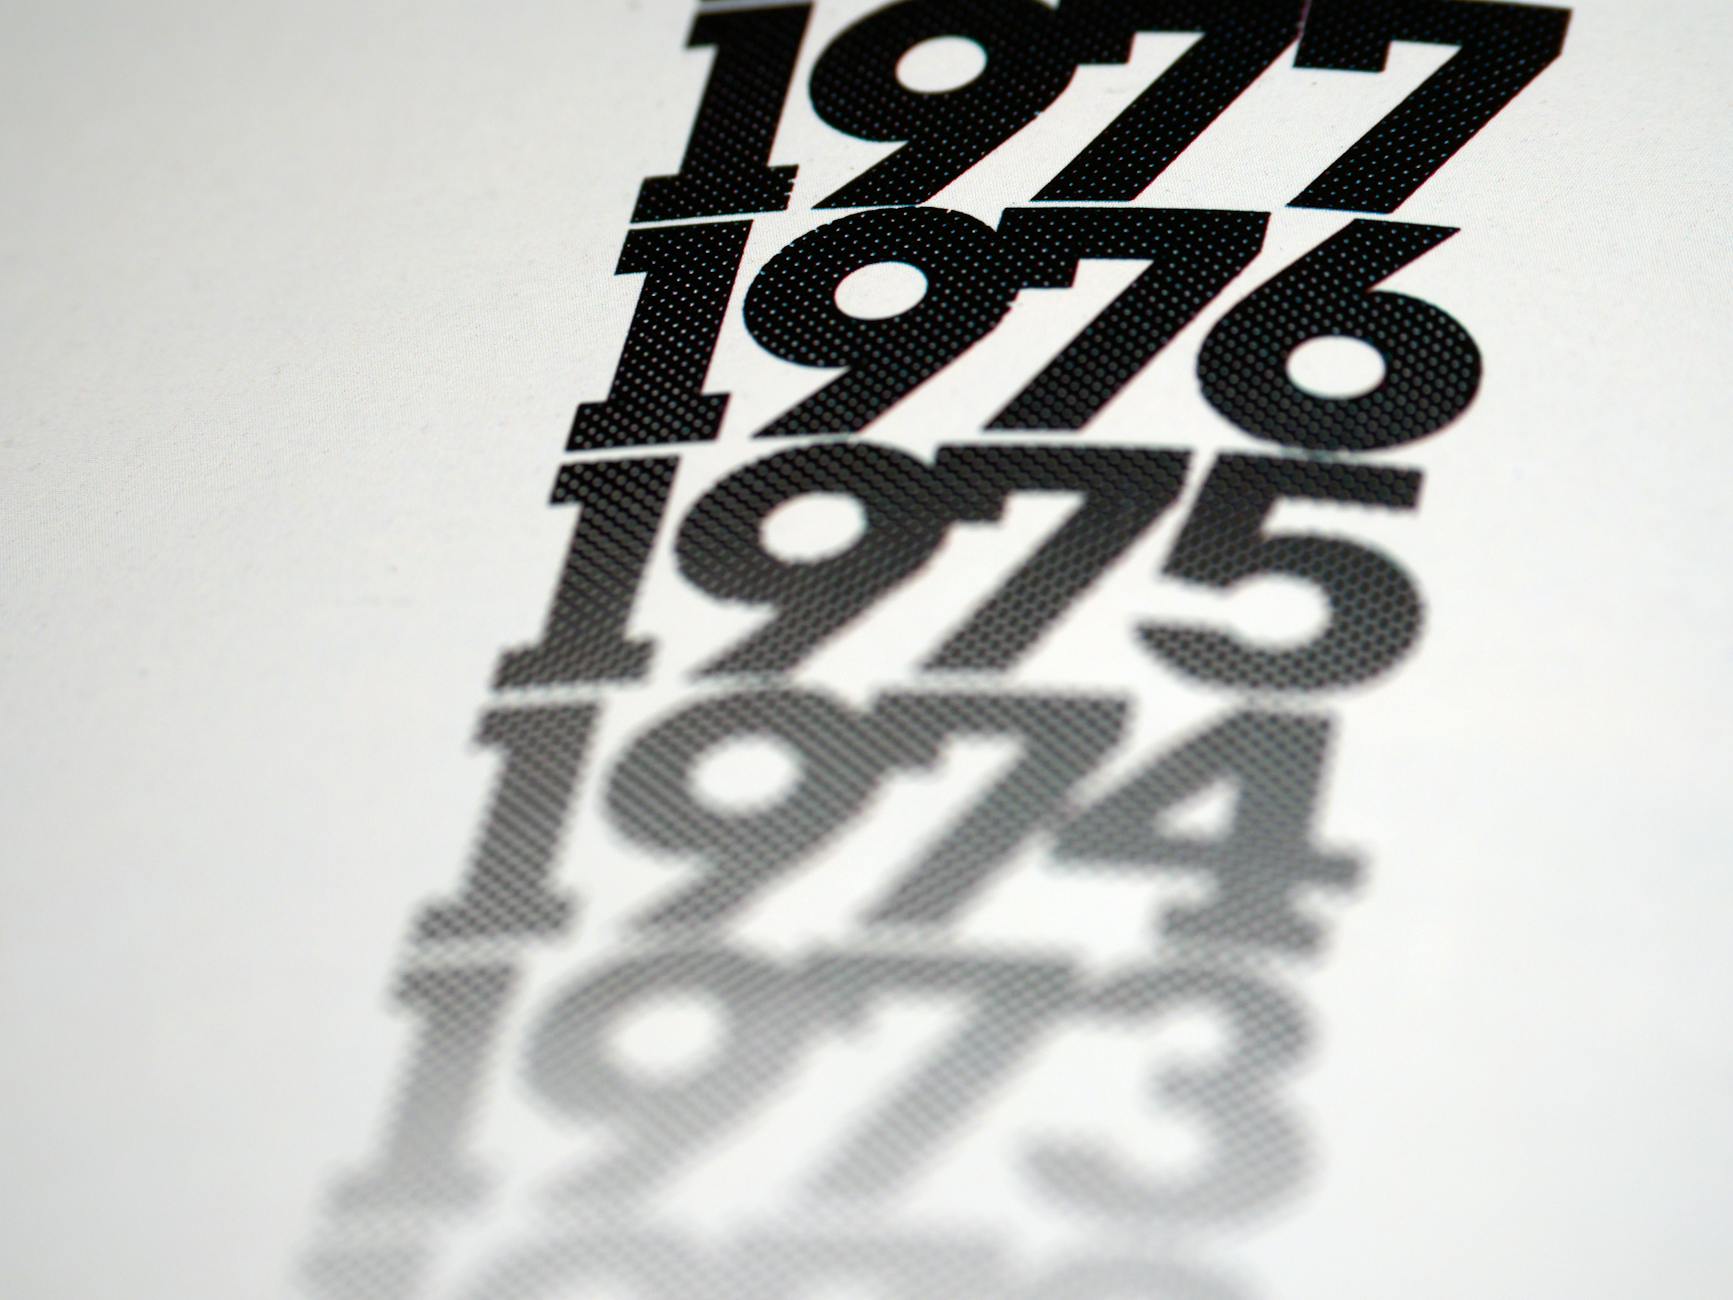 a close up shot of years in black and white text